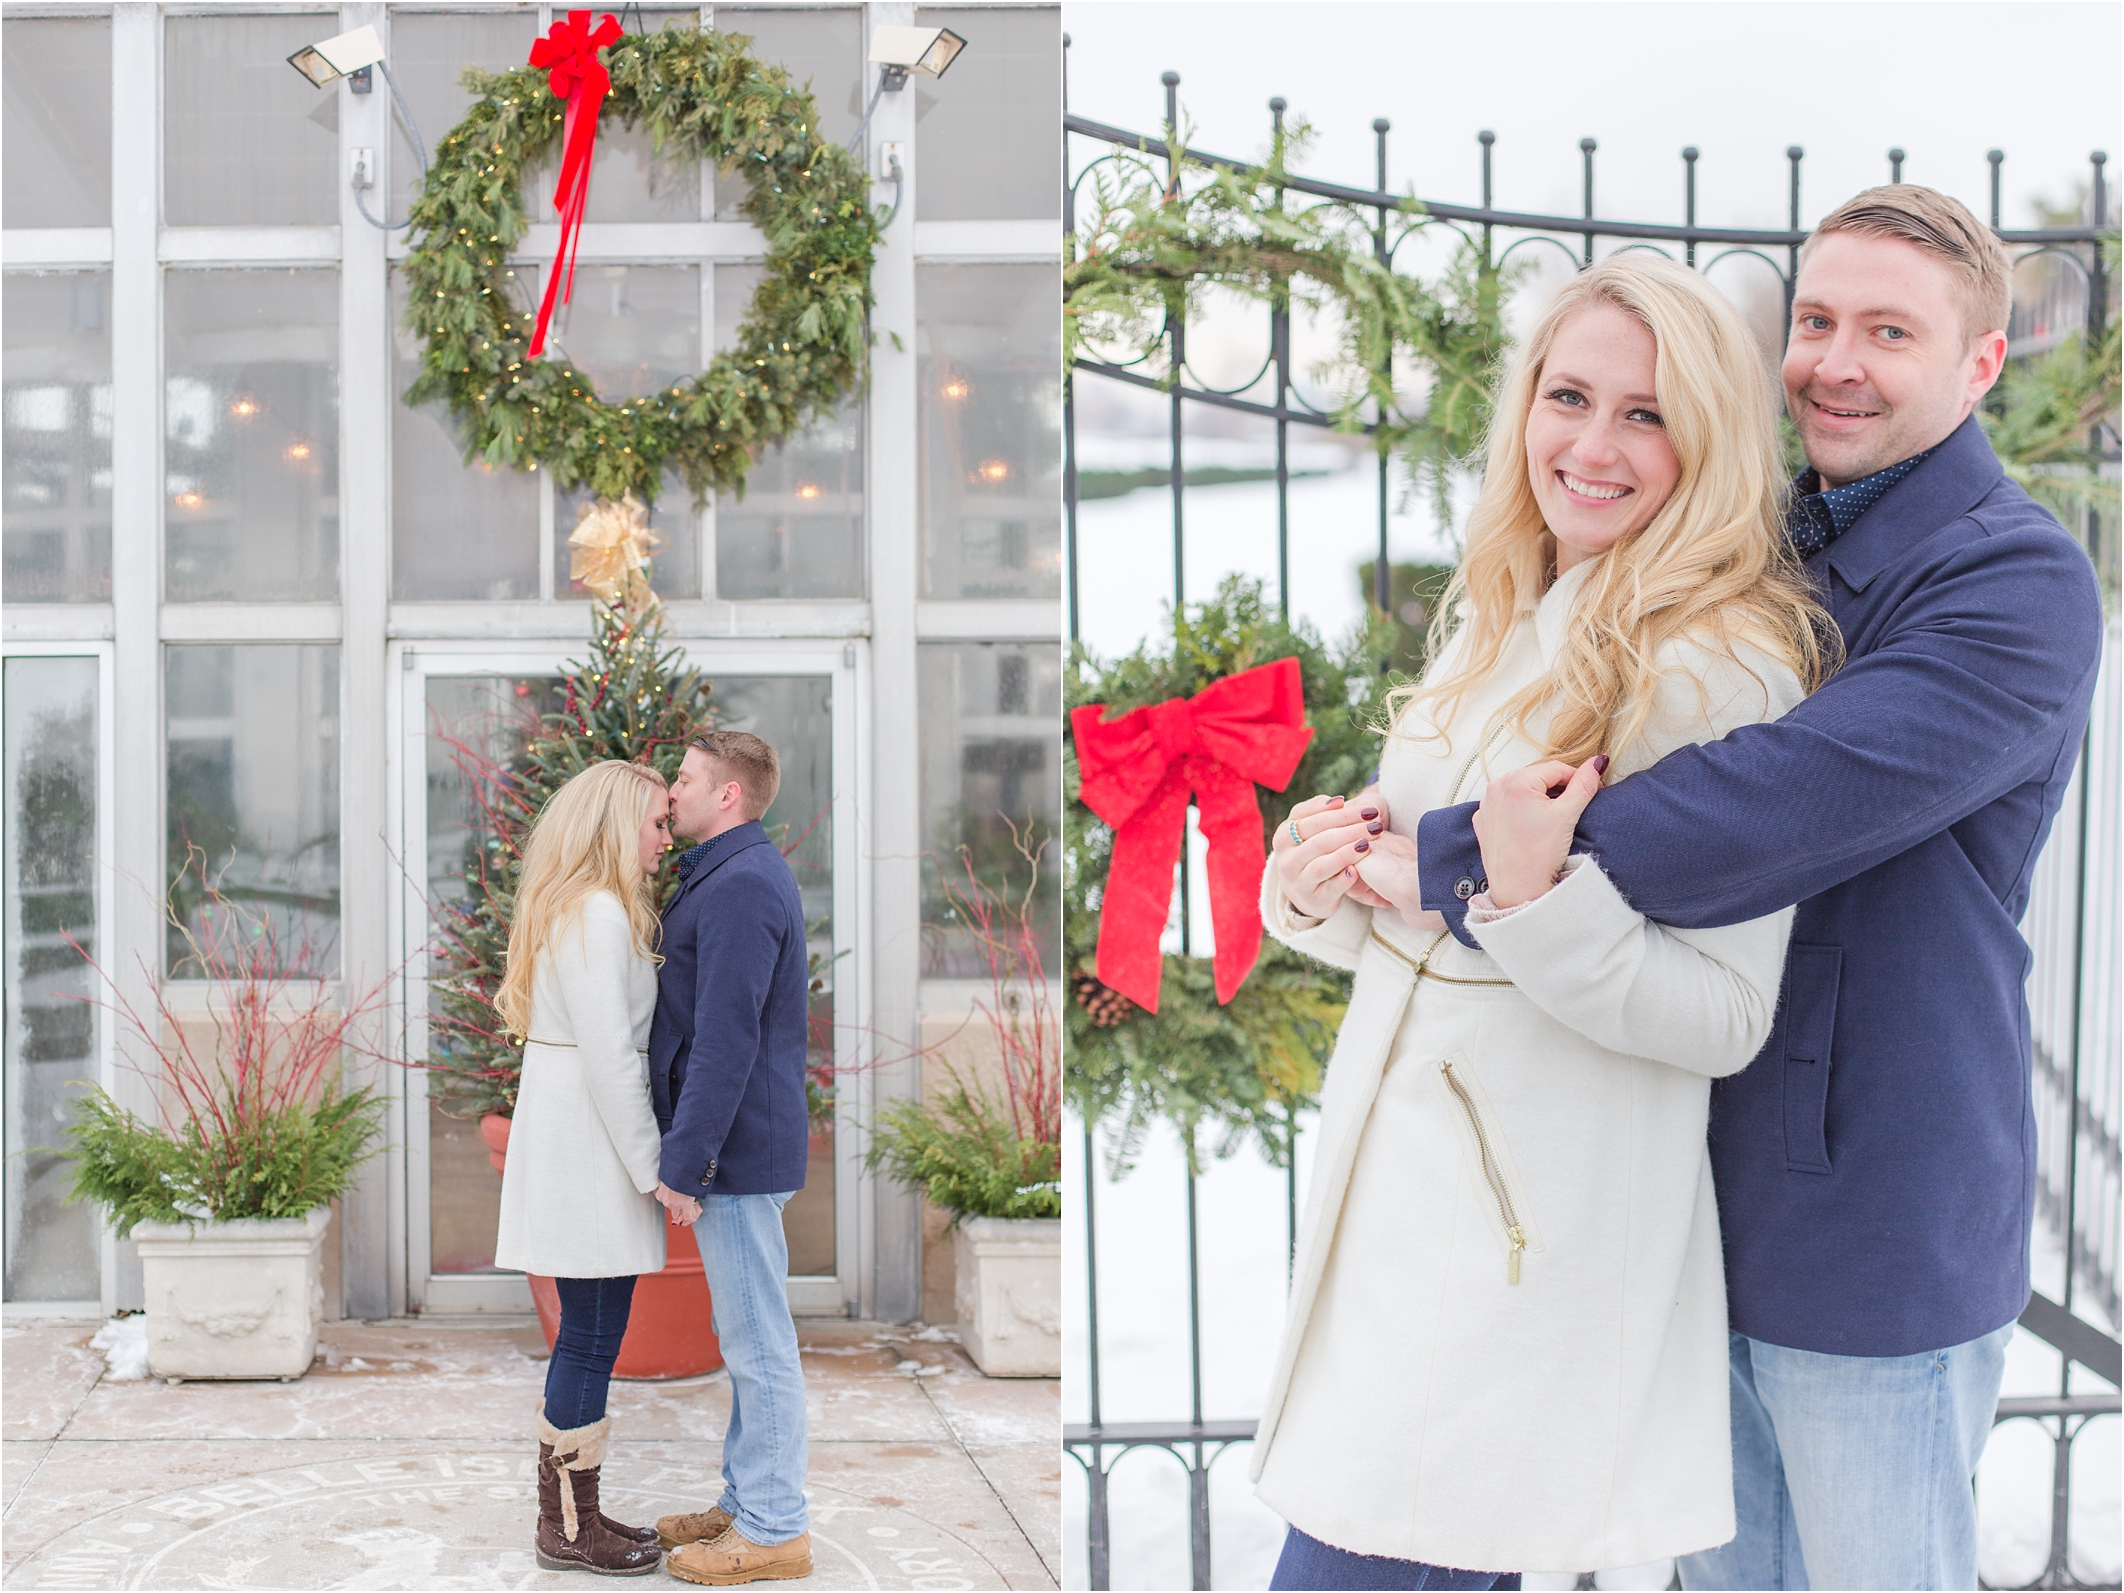 elegant-classic-belle-isle-conservatory-engagement-photos-in-detroit-mi-by-courtney-carolyn-photography_0038.jpg